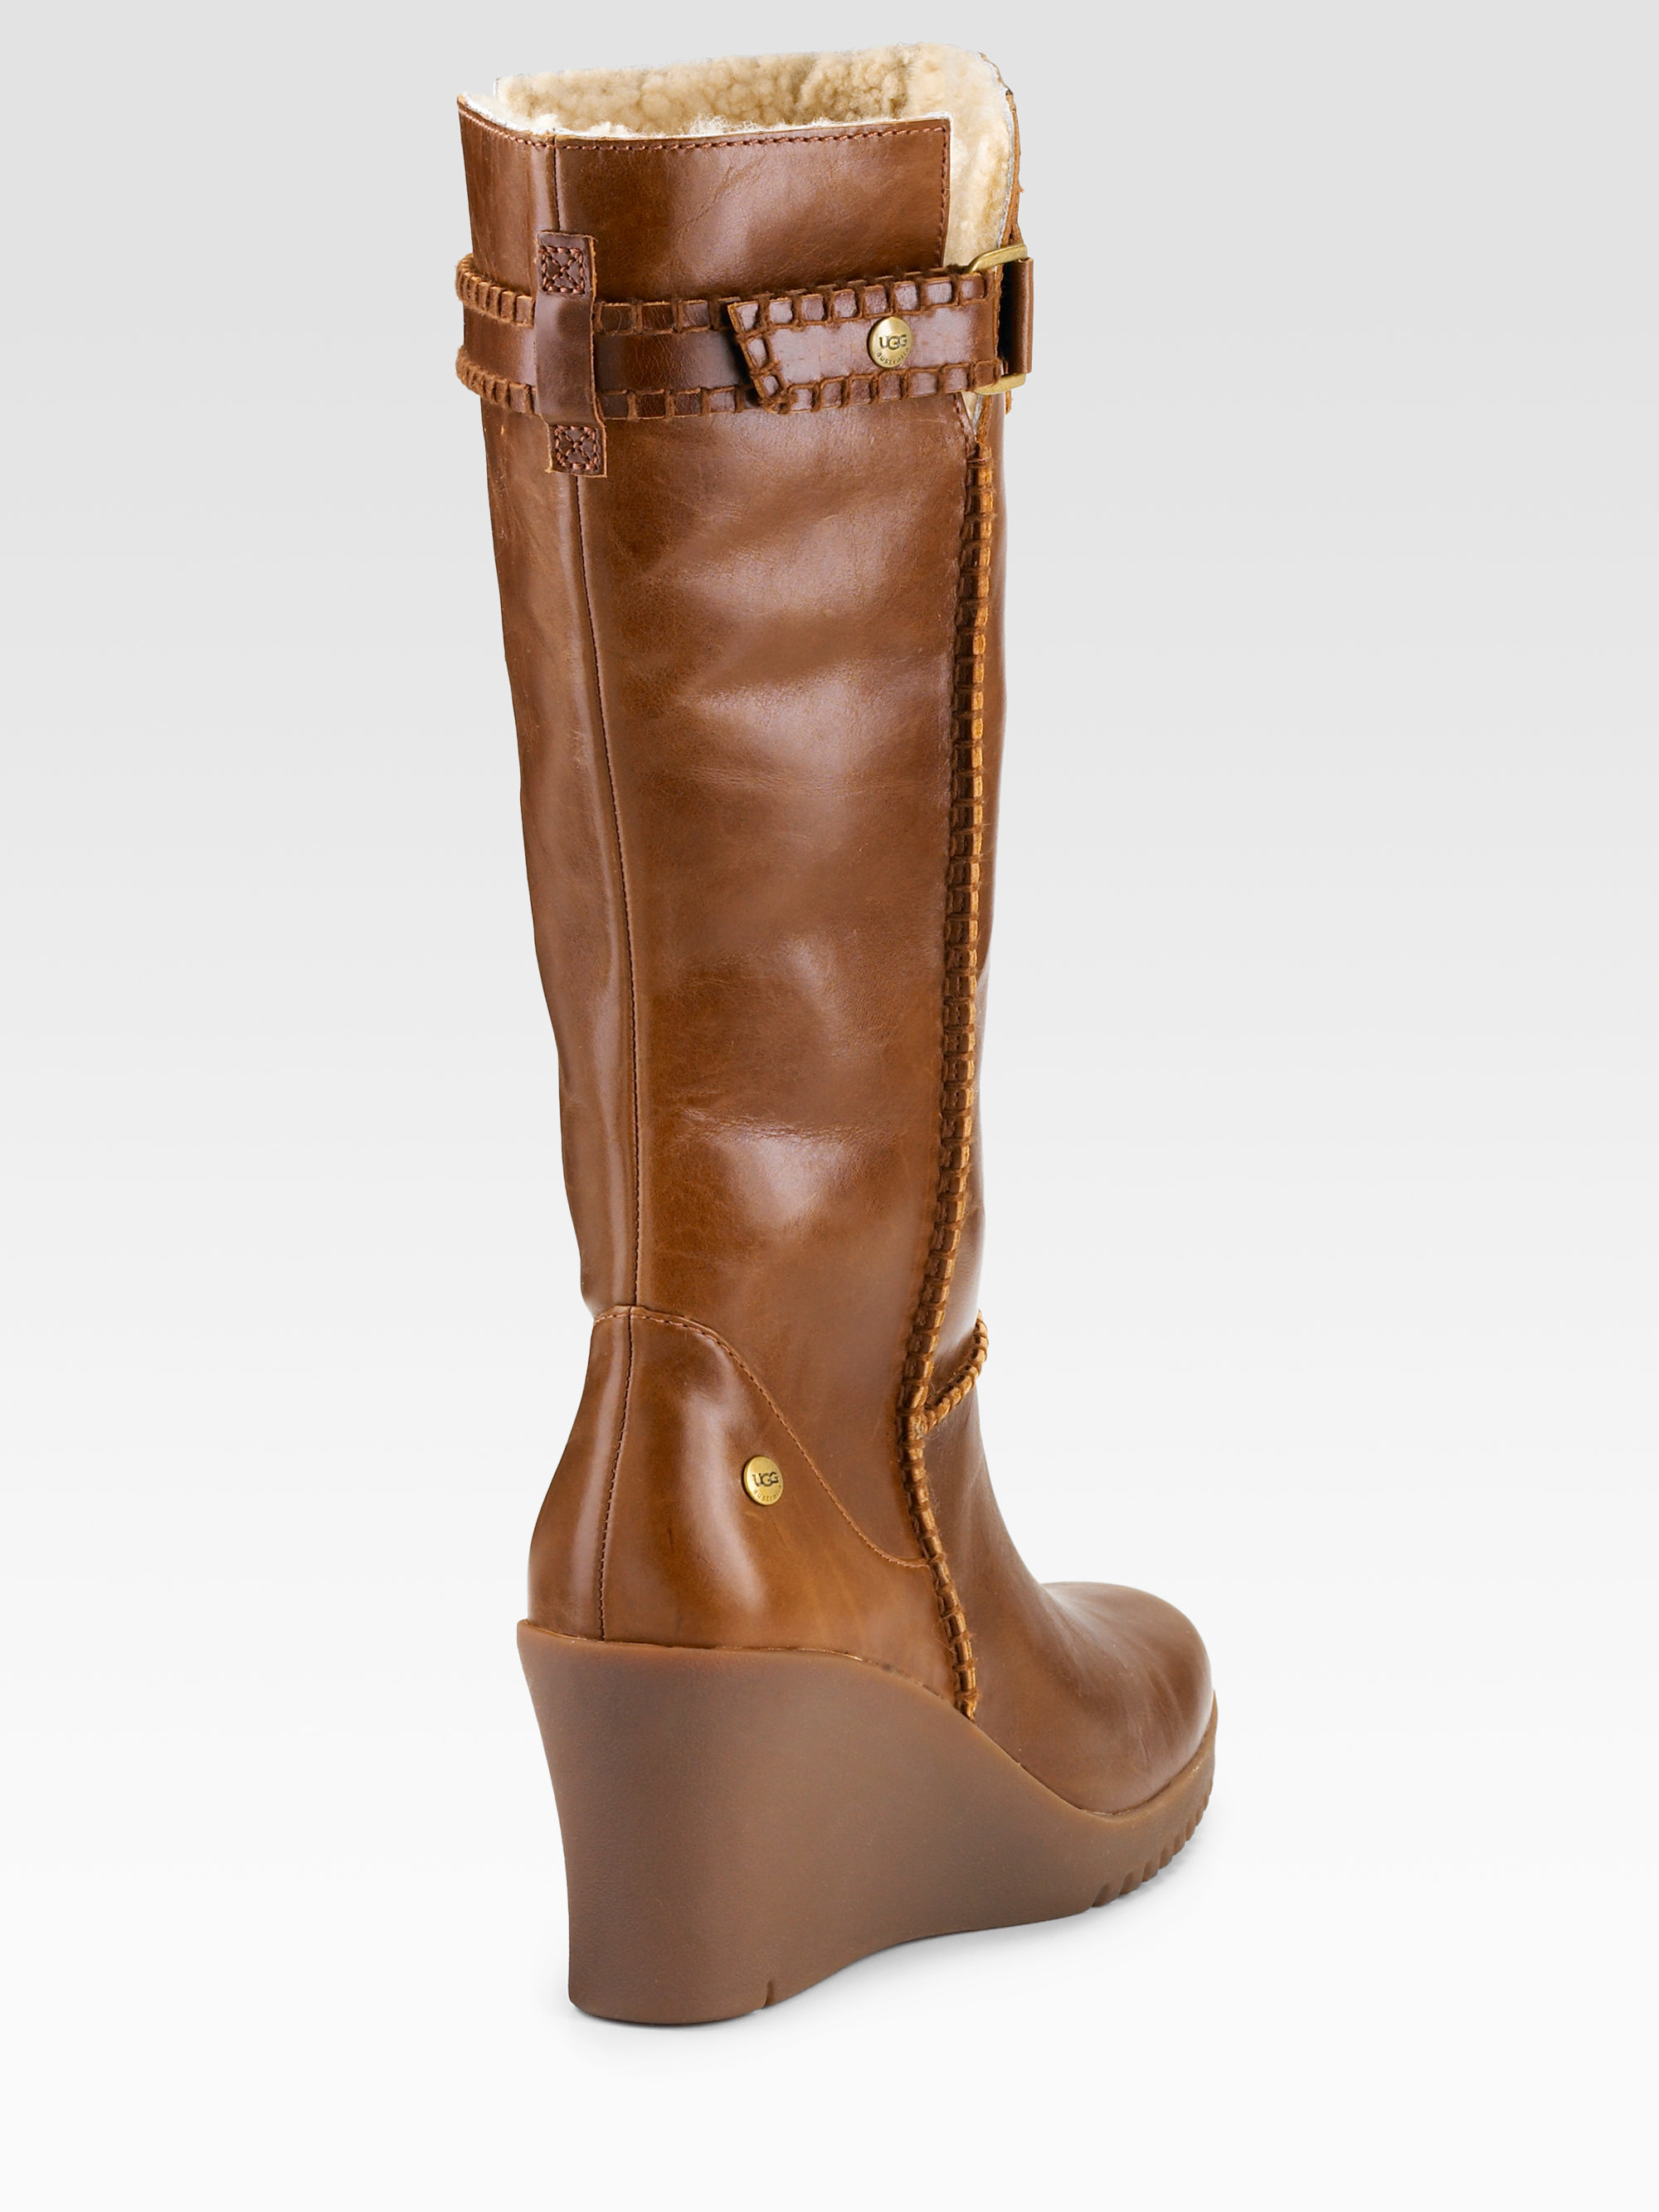 ugg tall wedge boots